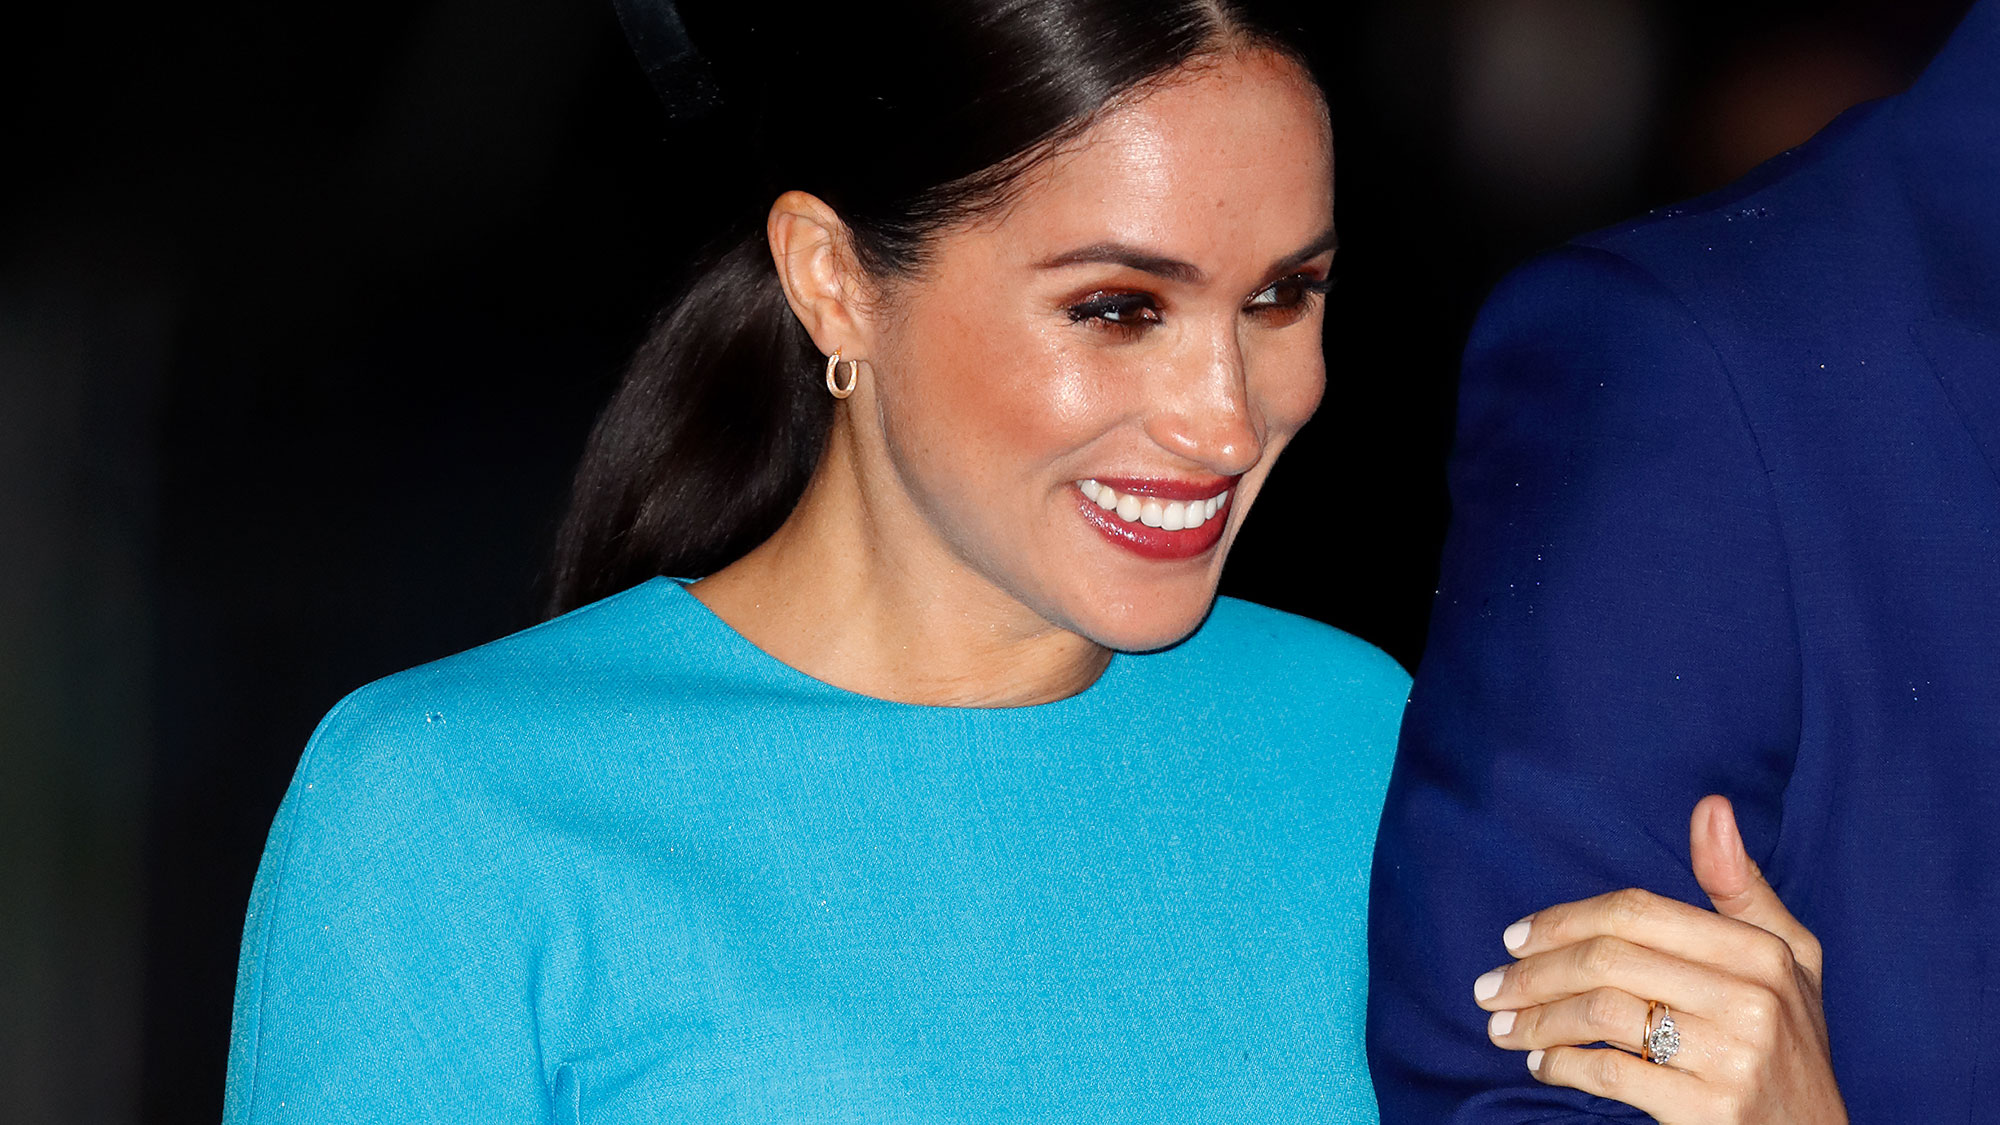 Meghan Markle has her go-to glam squad ready for the Platinum Jubilee ...